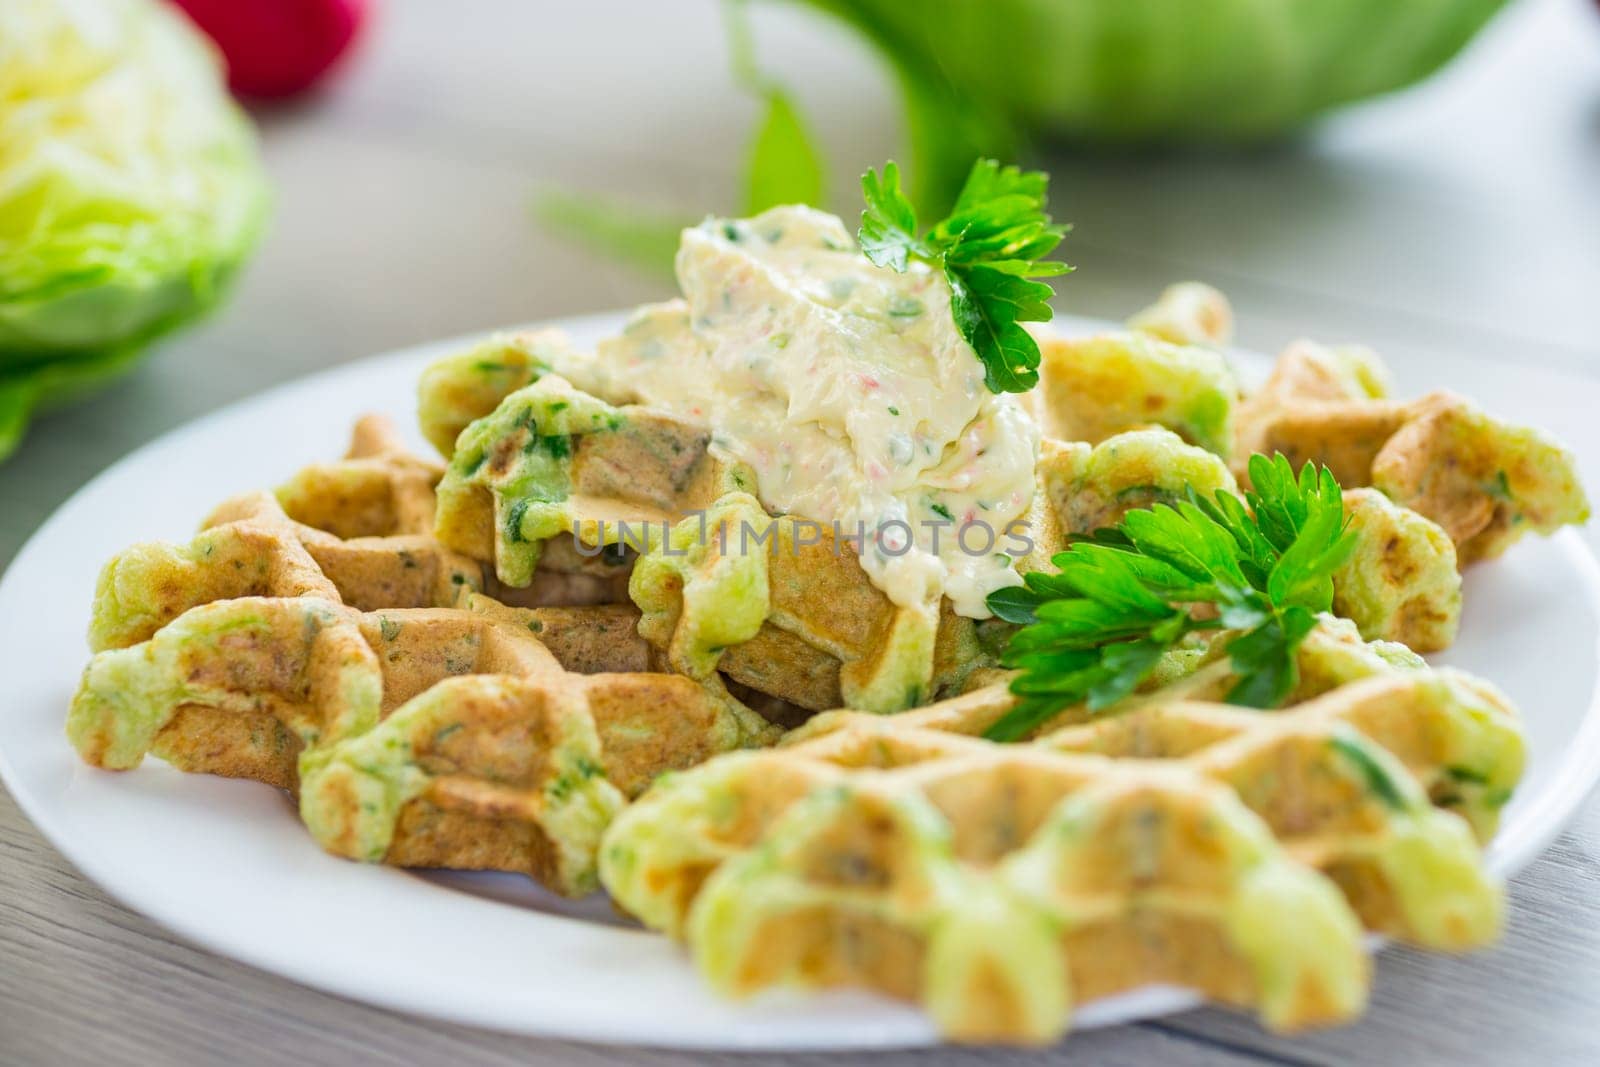 vegetable cabbage waffles fried with herbs by Rawlik